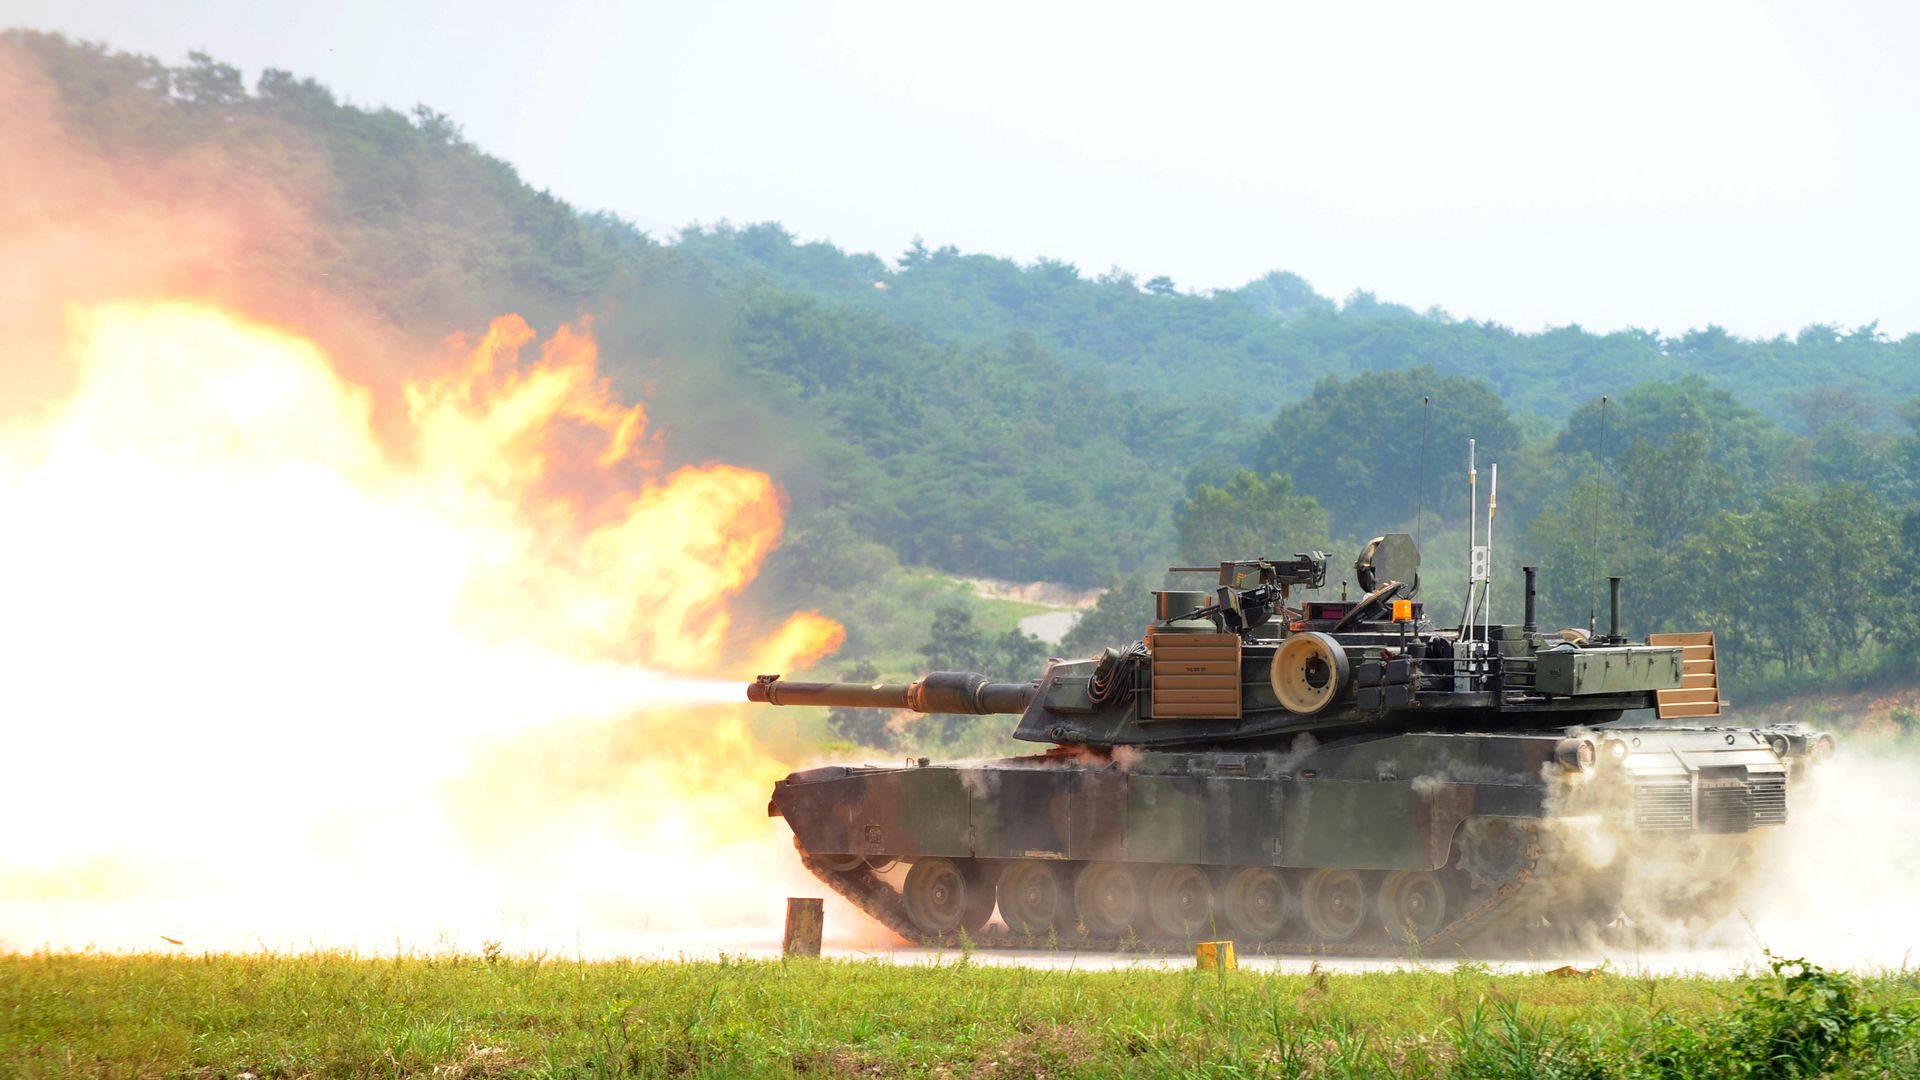 A US M1A2 SEP Abrams battle tank fires live rounds at the US Army's Rodriguez Live Firing Range in Pocheon,about 15 km south of the demilitarized zone separating the two Koreas, on September 1, 2011.